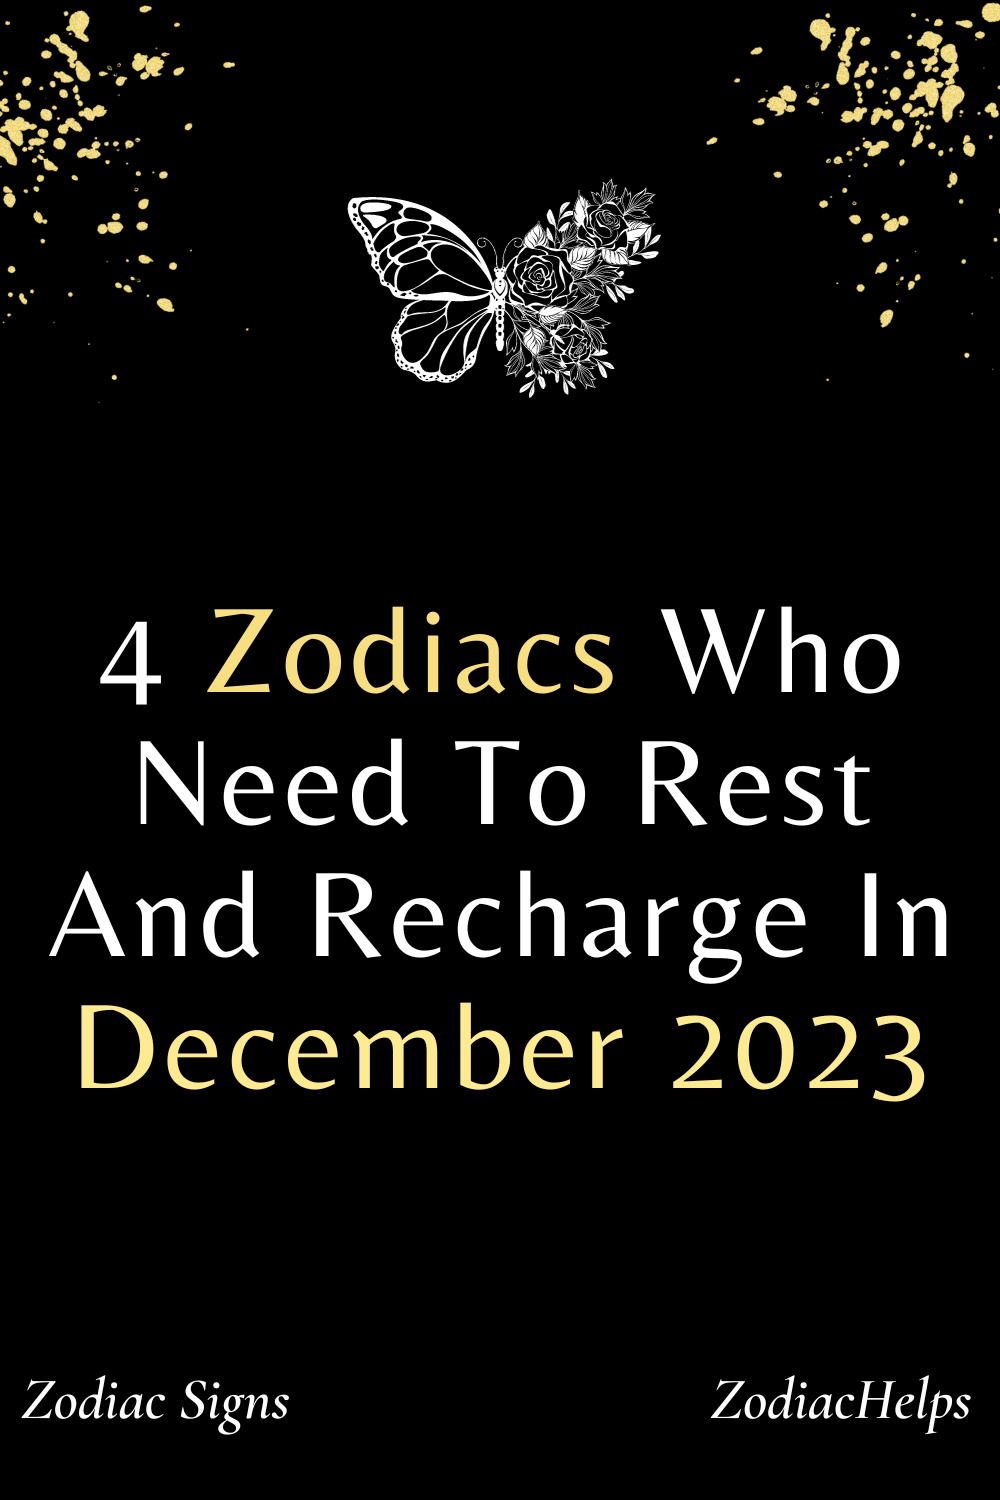 4 Zodiacs Who Need To Rest And Recharge In December 2023